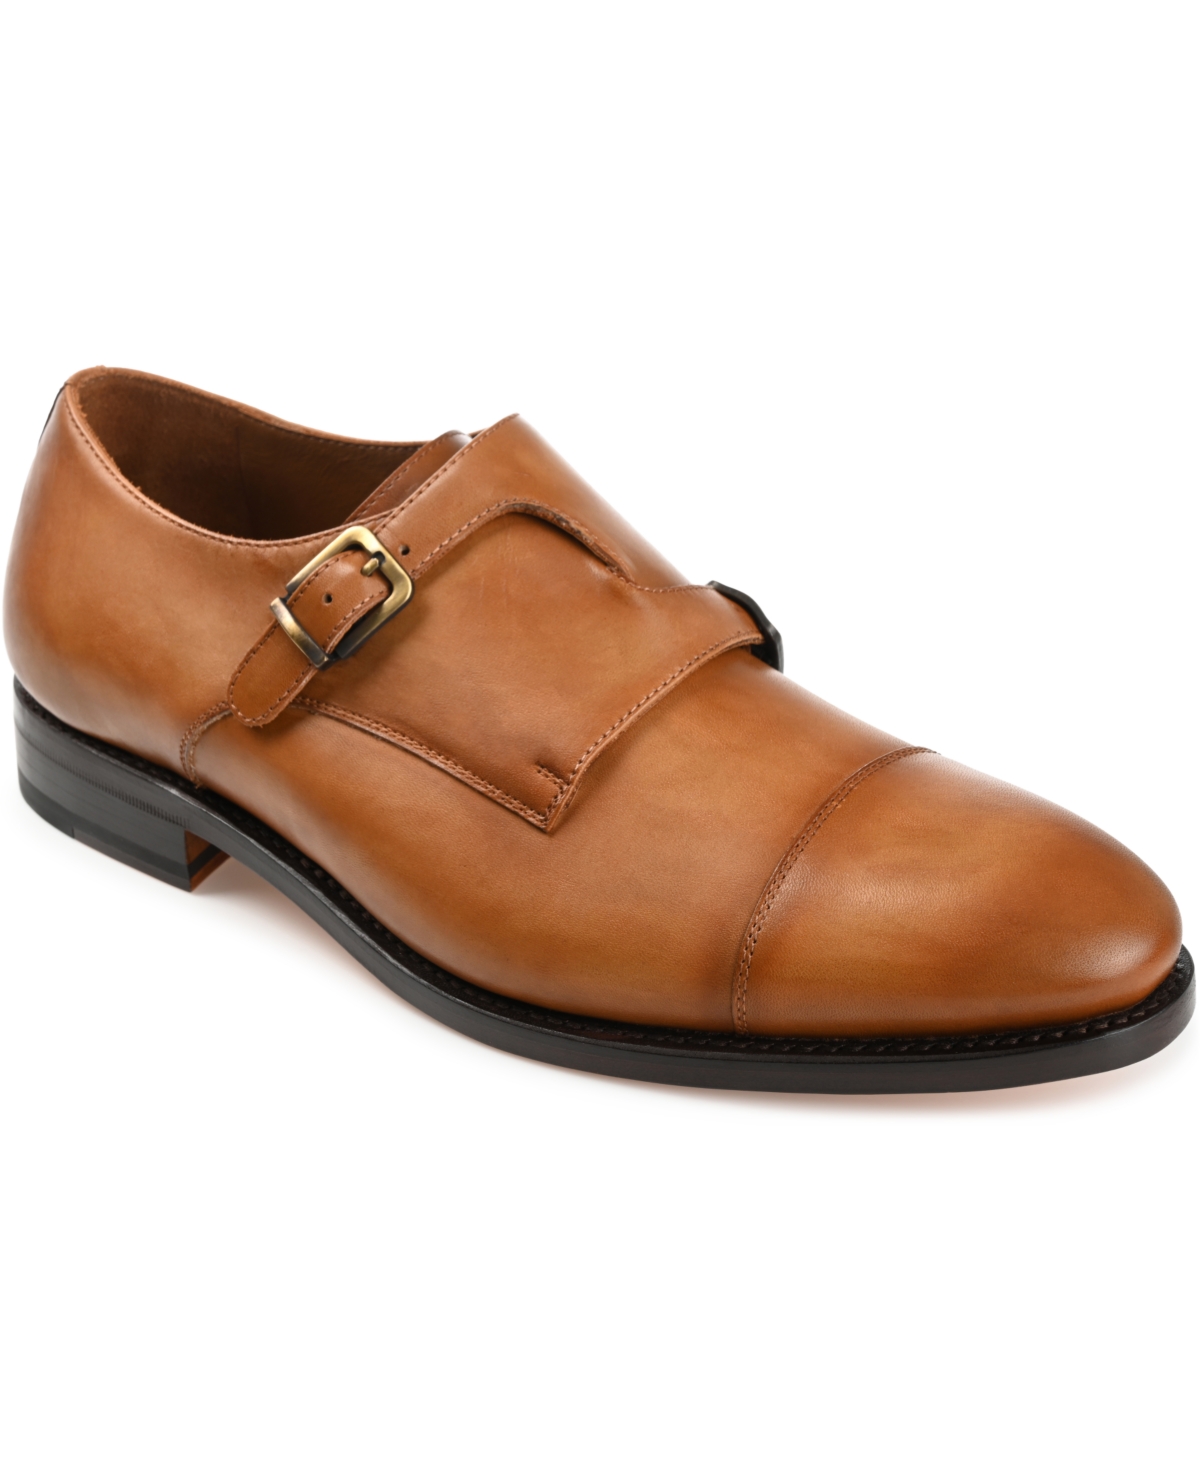 Men's Prince Genuine Leather Double Monk Strap Dress Shoes - Coffee